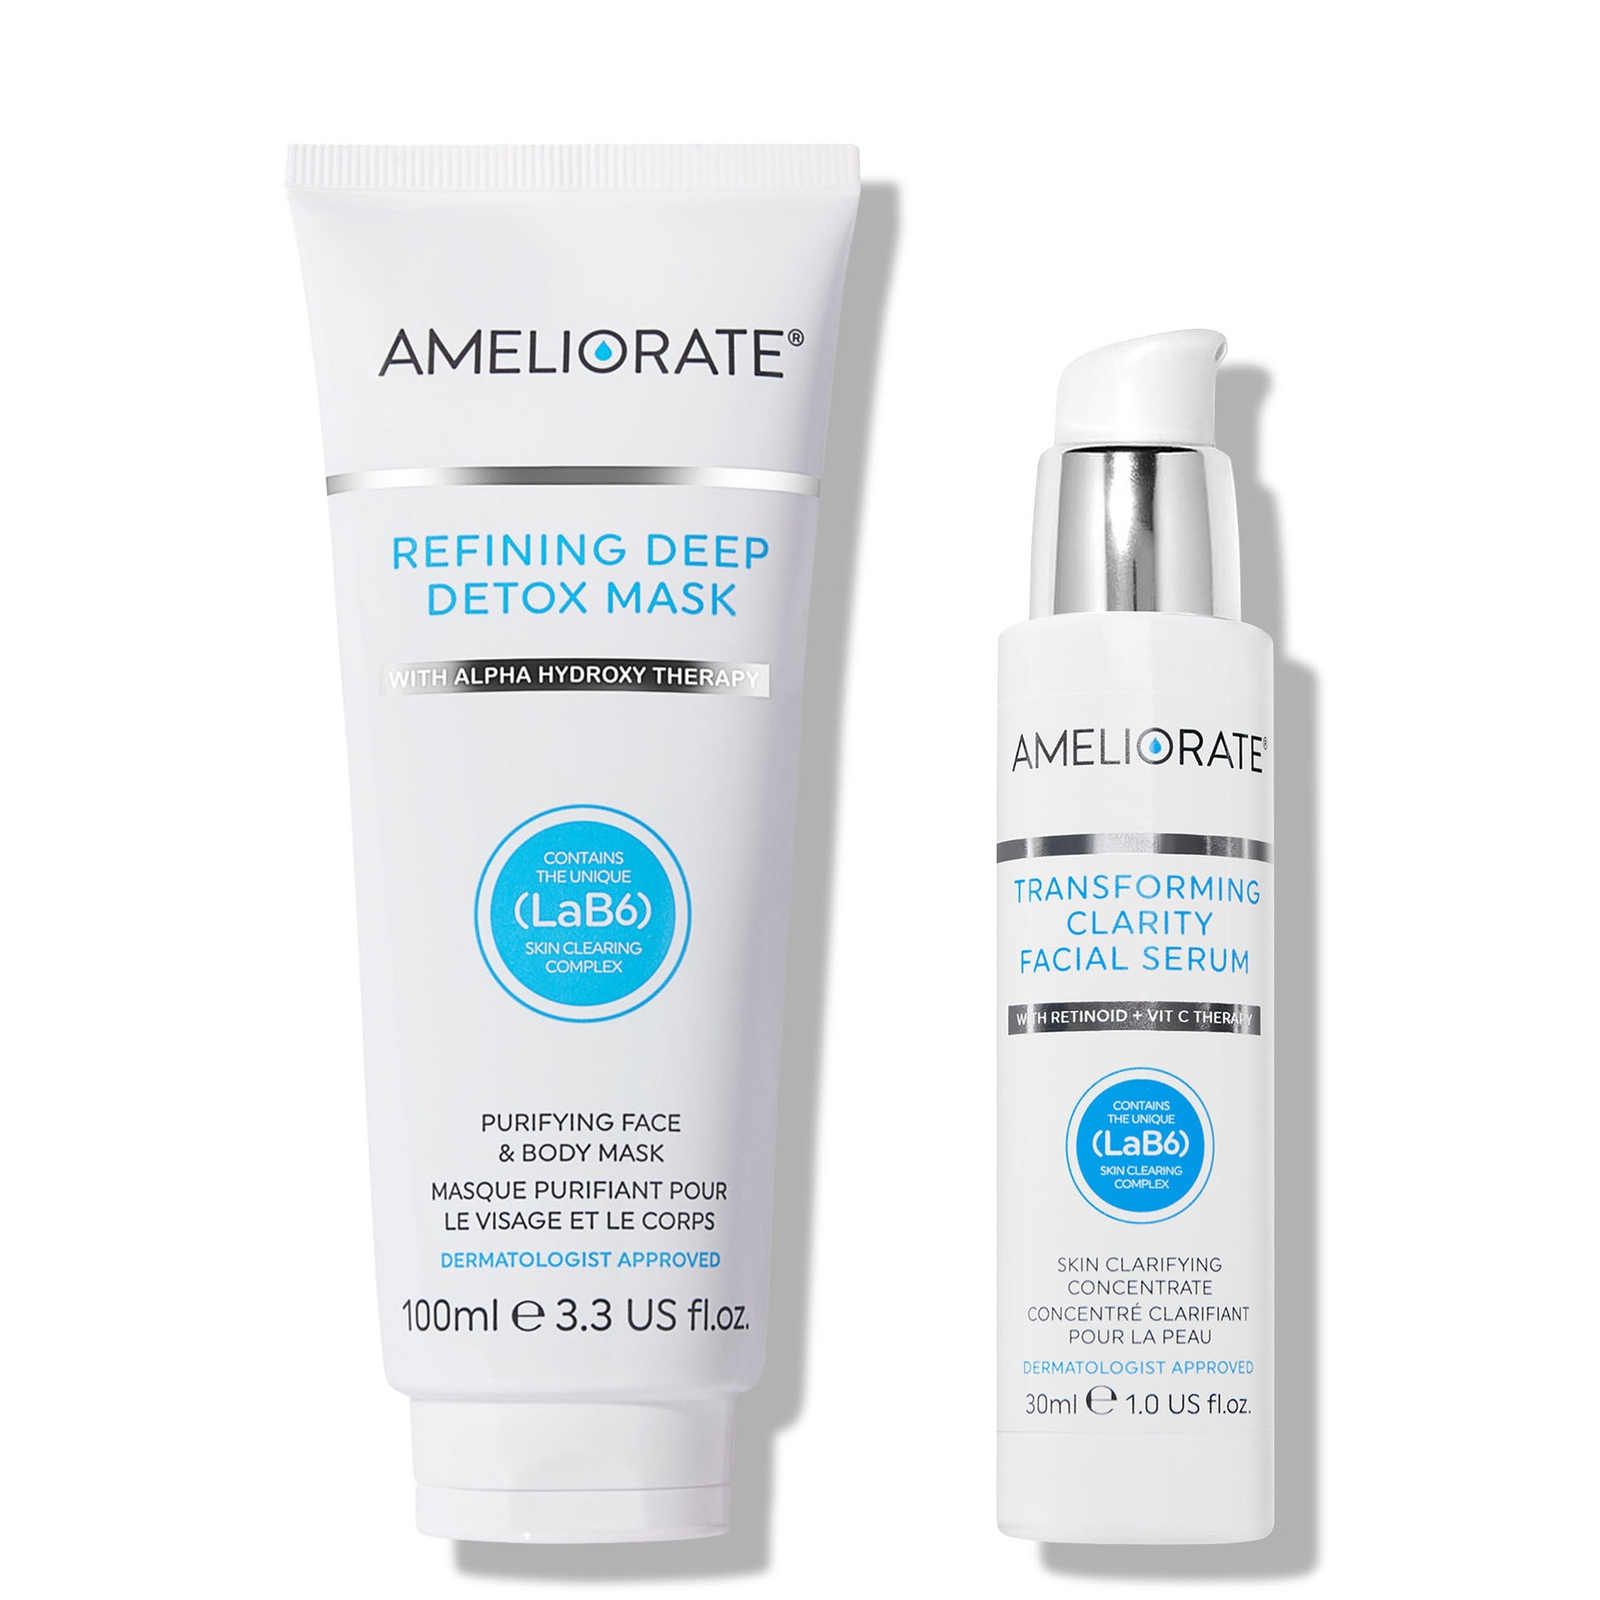 Ameliorate Blemish Treatments Duo In White